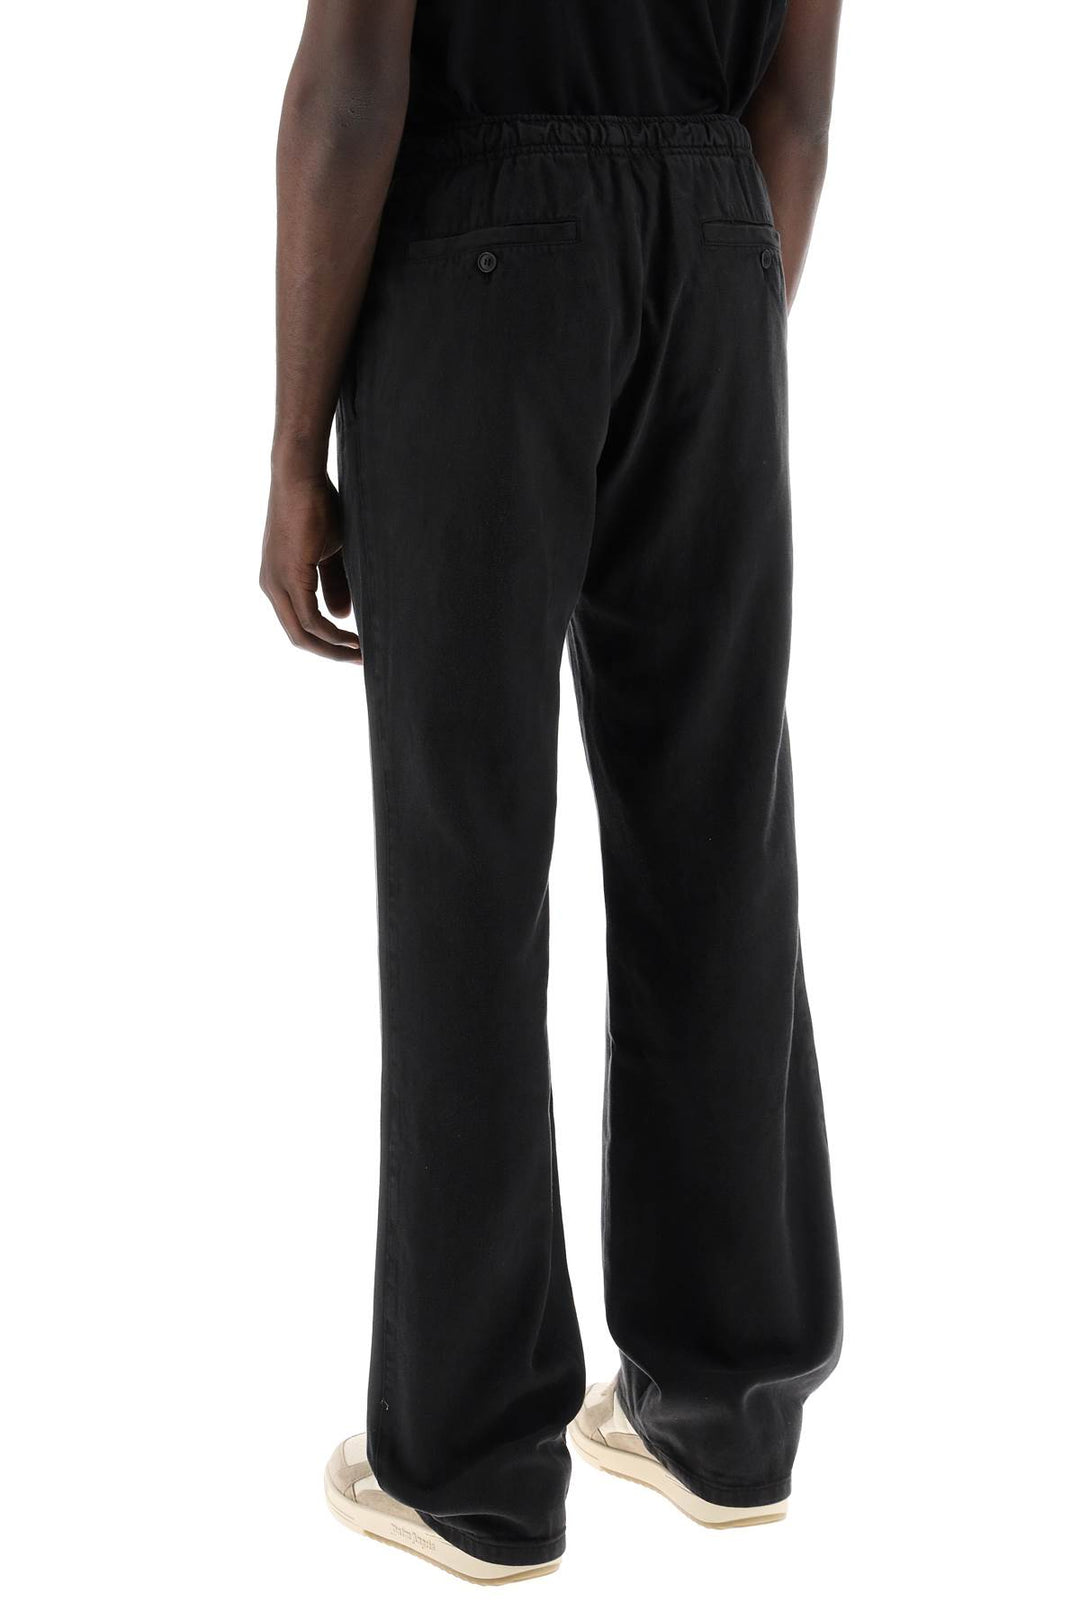 Palm Angels Wide Legged Travel Pants For Comfortable   Nero